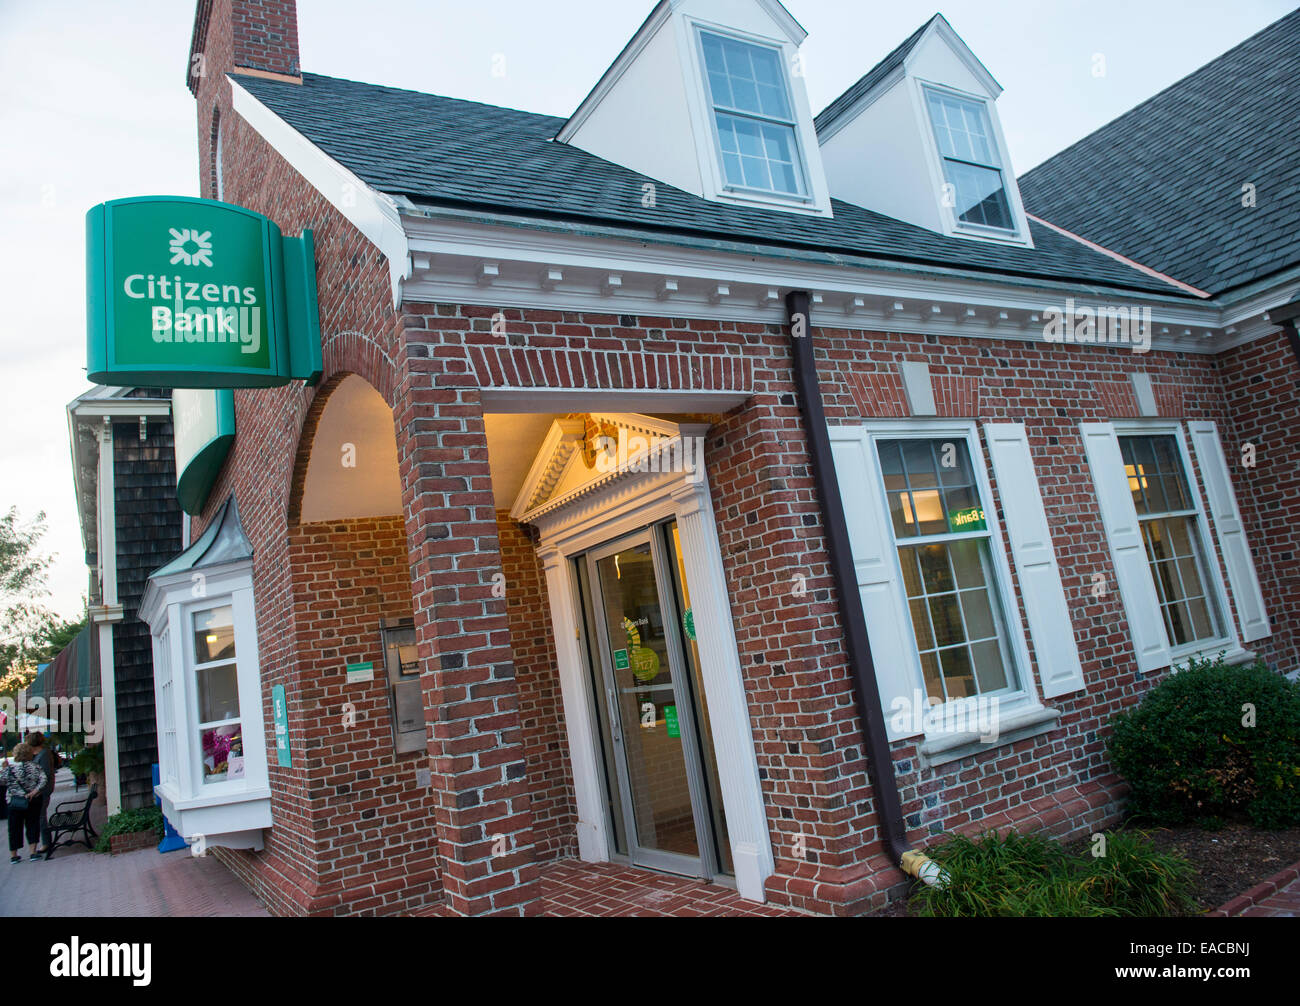 Citizens Bank in Lewes, Sussex County Delaware USA Stock Photo